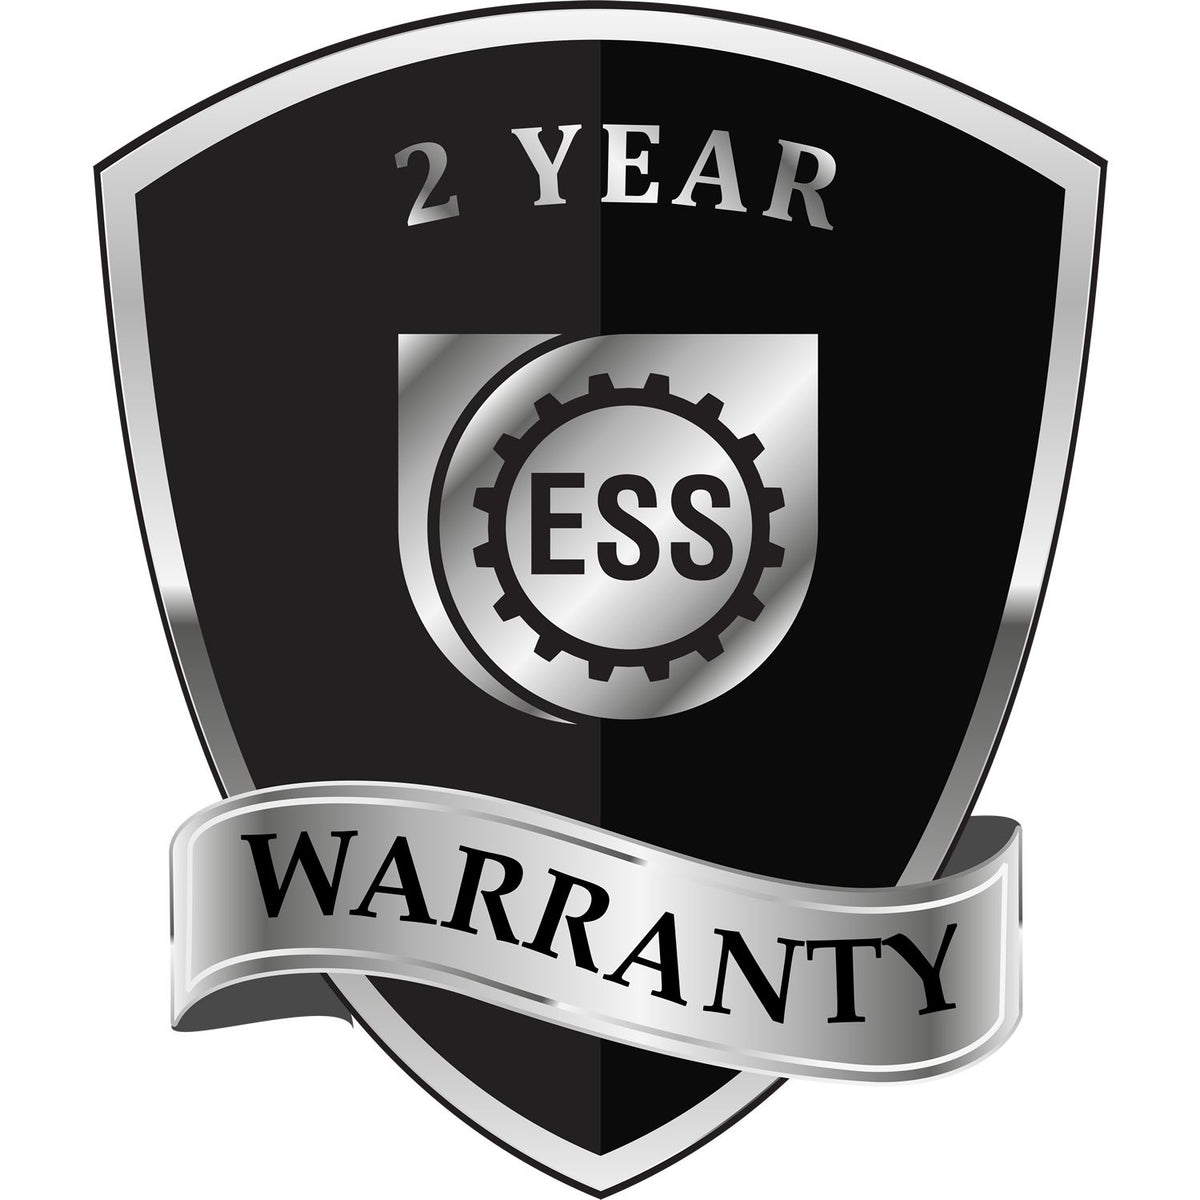 A black and silver badge or emblem showing warranty information for the Soft Vermont Professional Geologist Seal